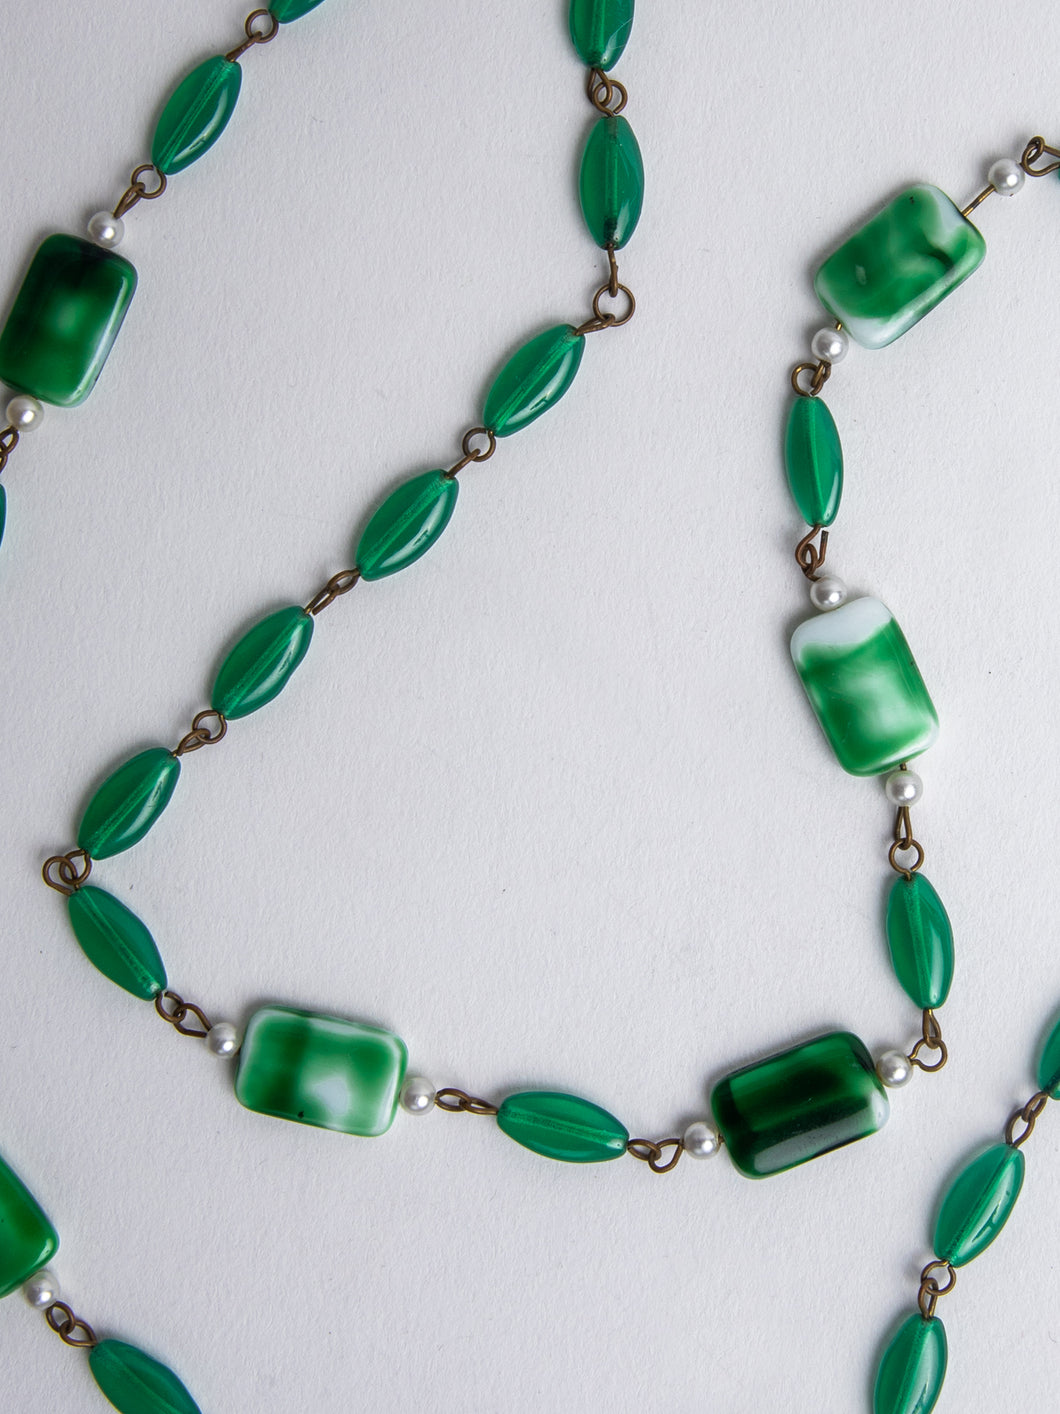 Vintage Necklace with Green Glass Beads and Pearls